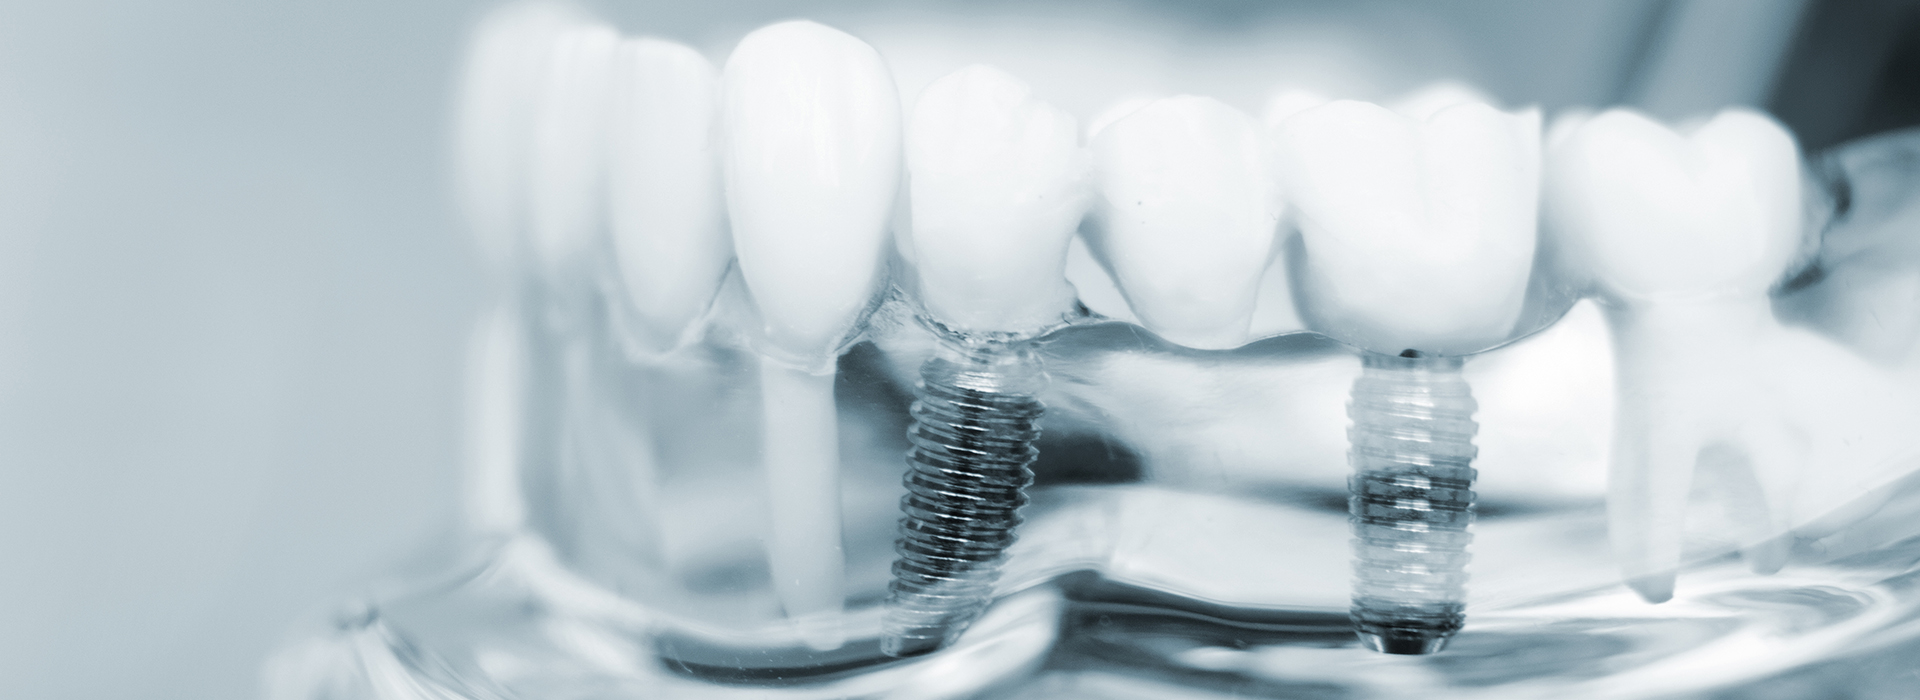 Astoria Modern Family Dental | Oral Cancer Screening, Root Canals and Ceramic Crowns